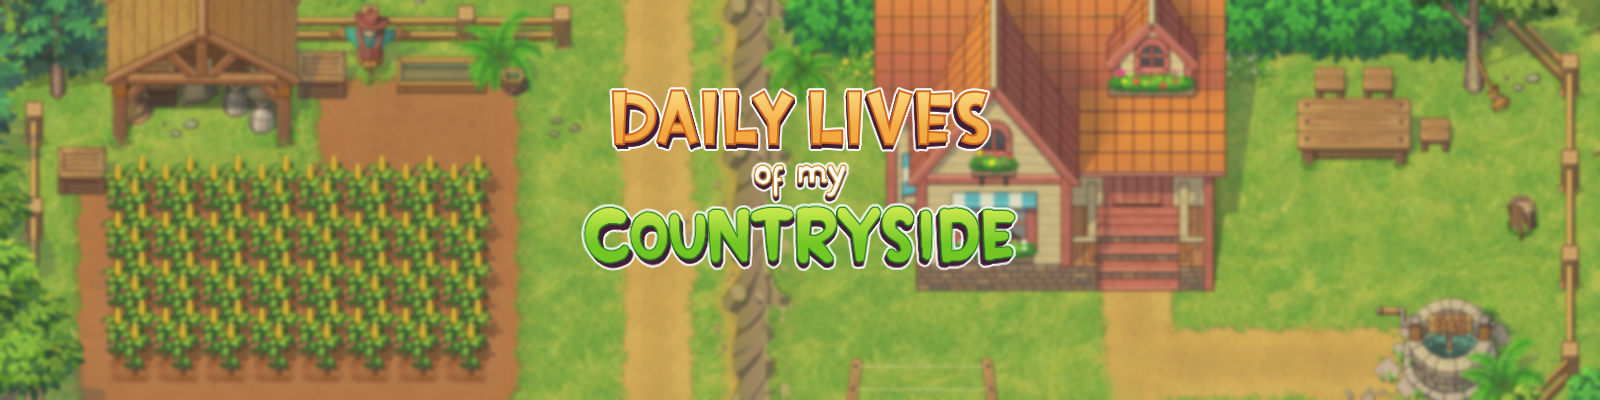 Connect to the countryside with Country Life magazine - Game and